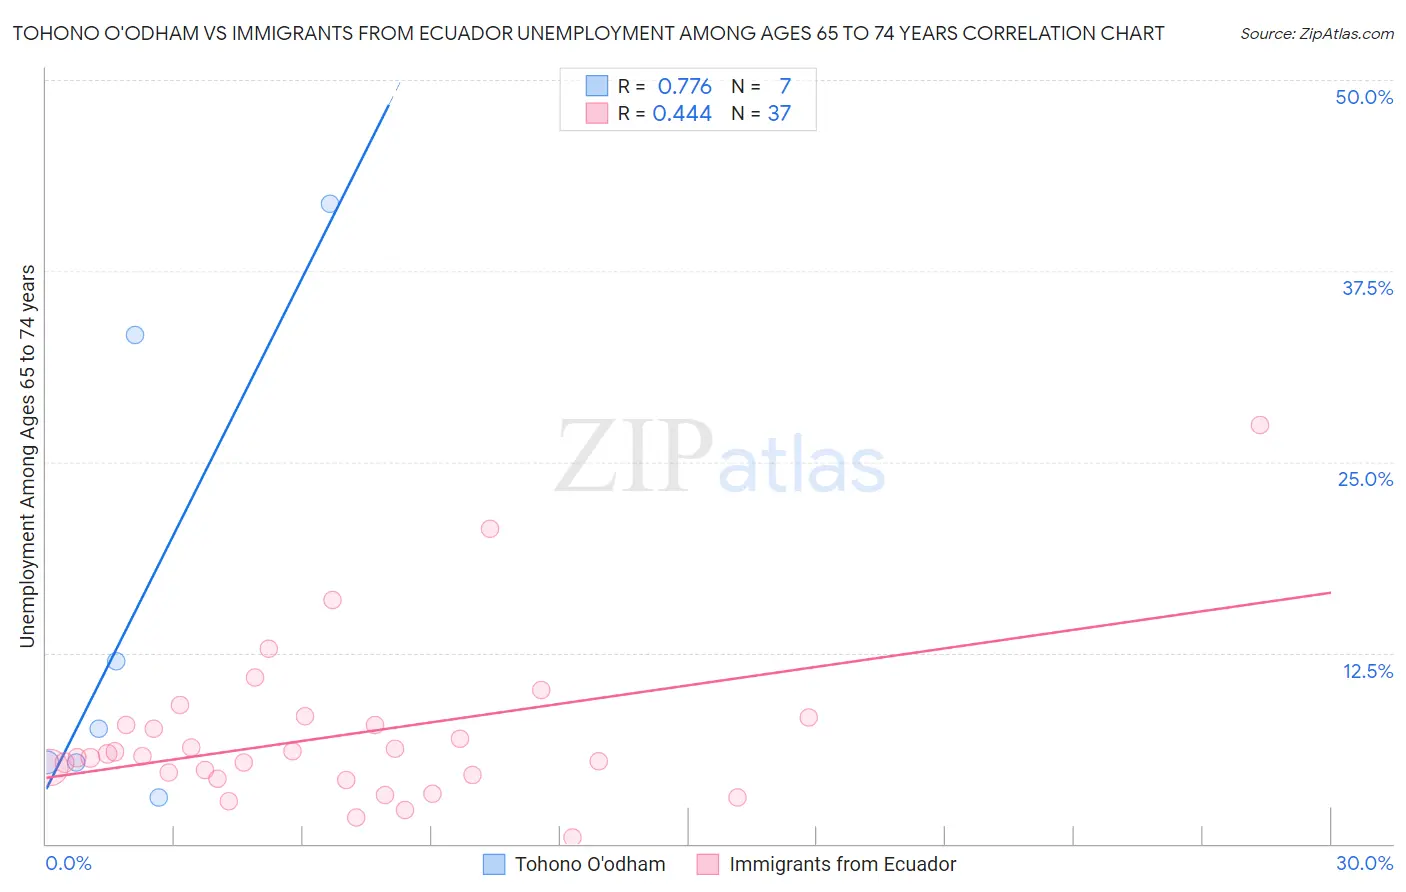 Tohono O'odham vs Immigrants from Ecuador Unemployment Among Ages 65 to 74 years